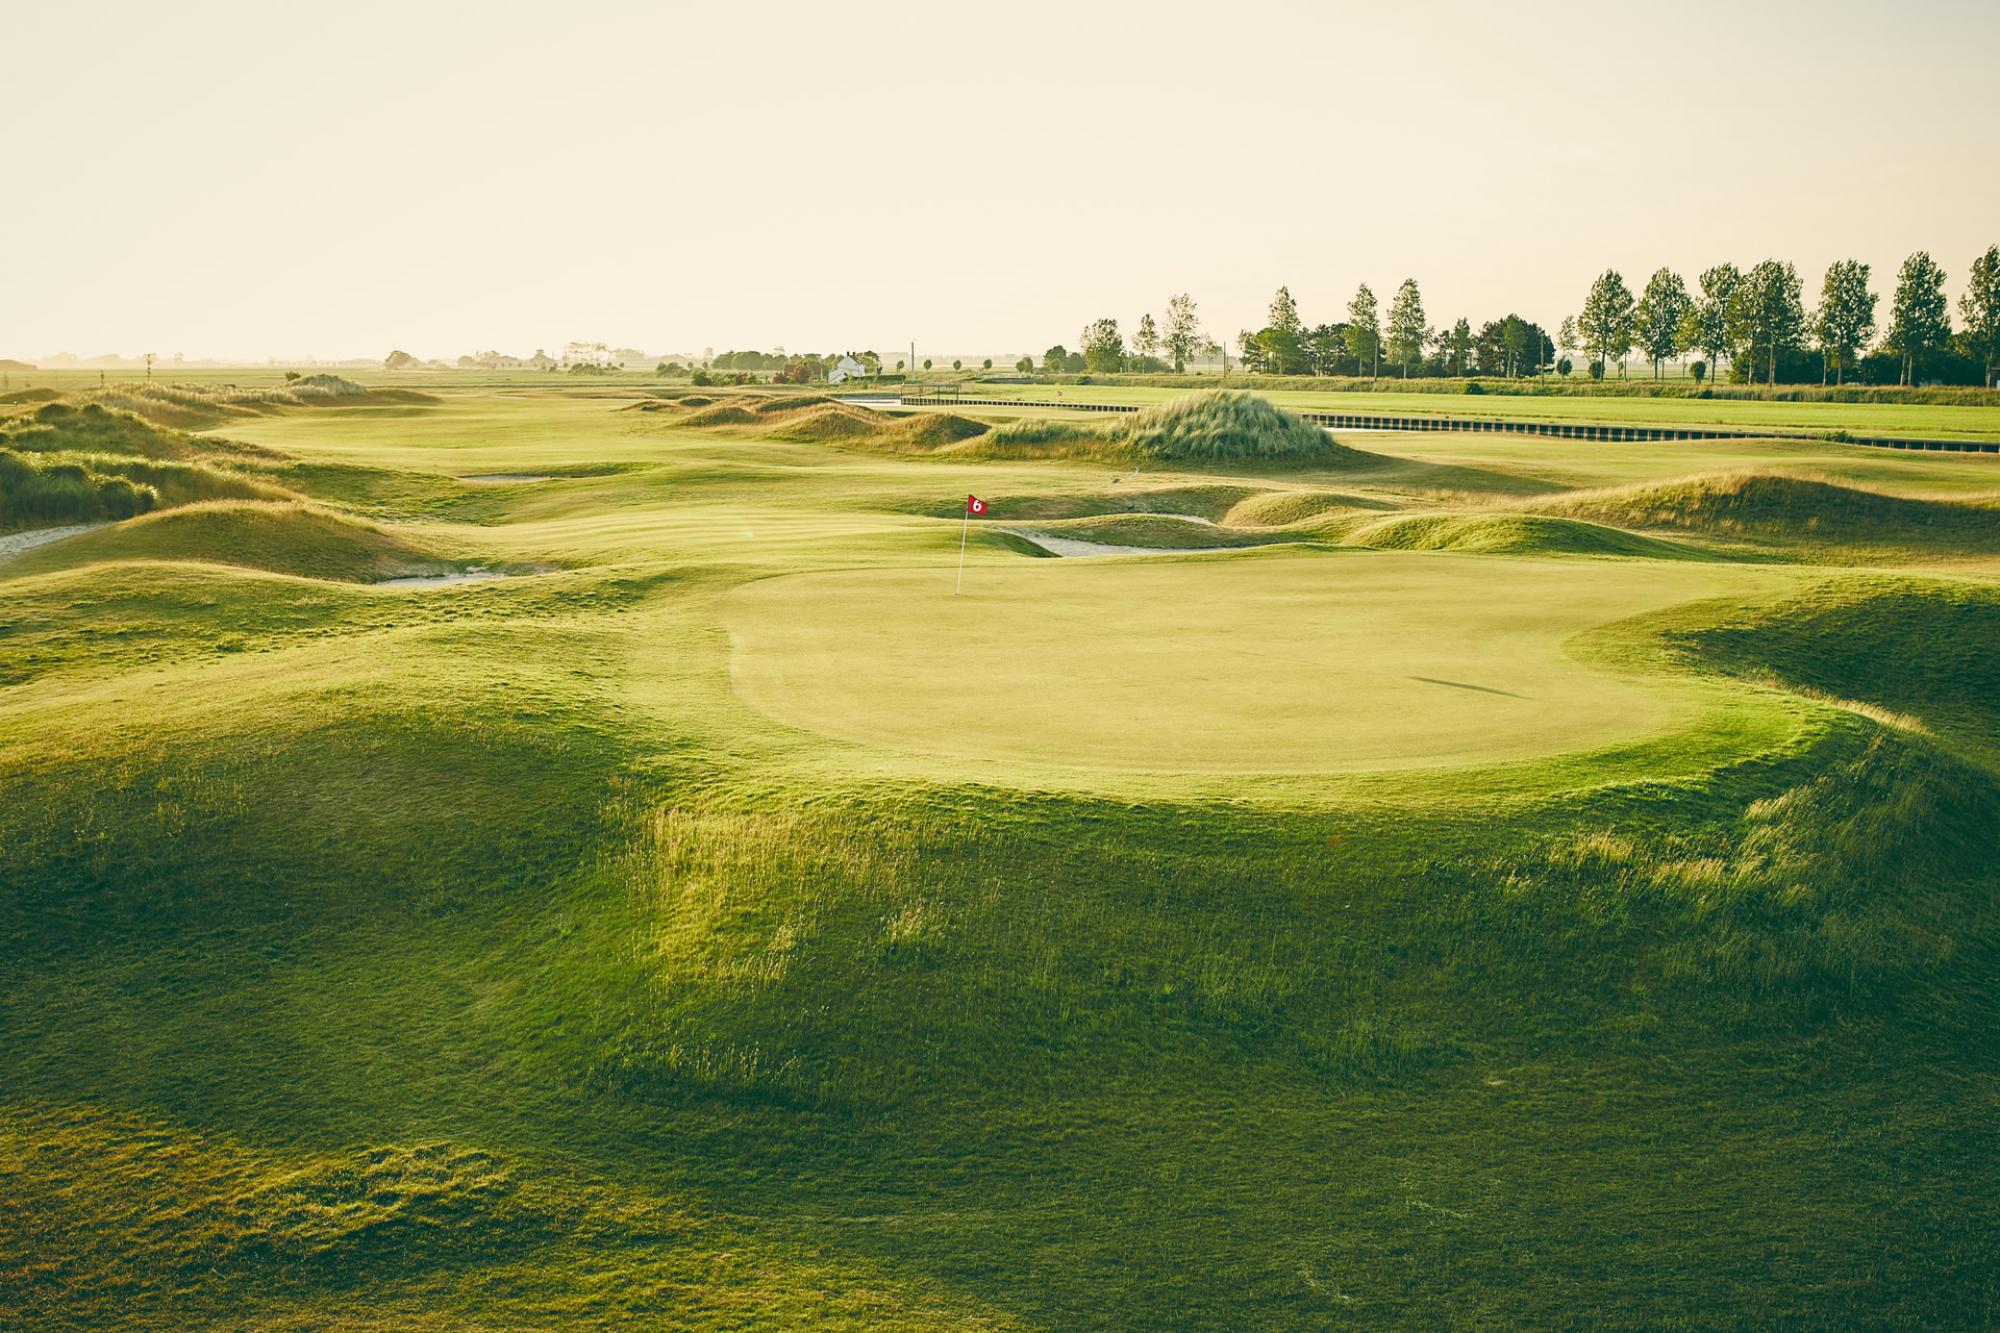 Koksijde Golf ter Hille consists of lots of the most desirable golf course near Bruges & Ypres